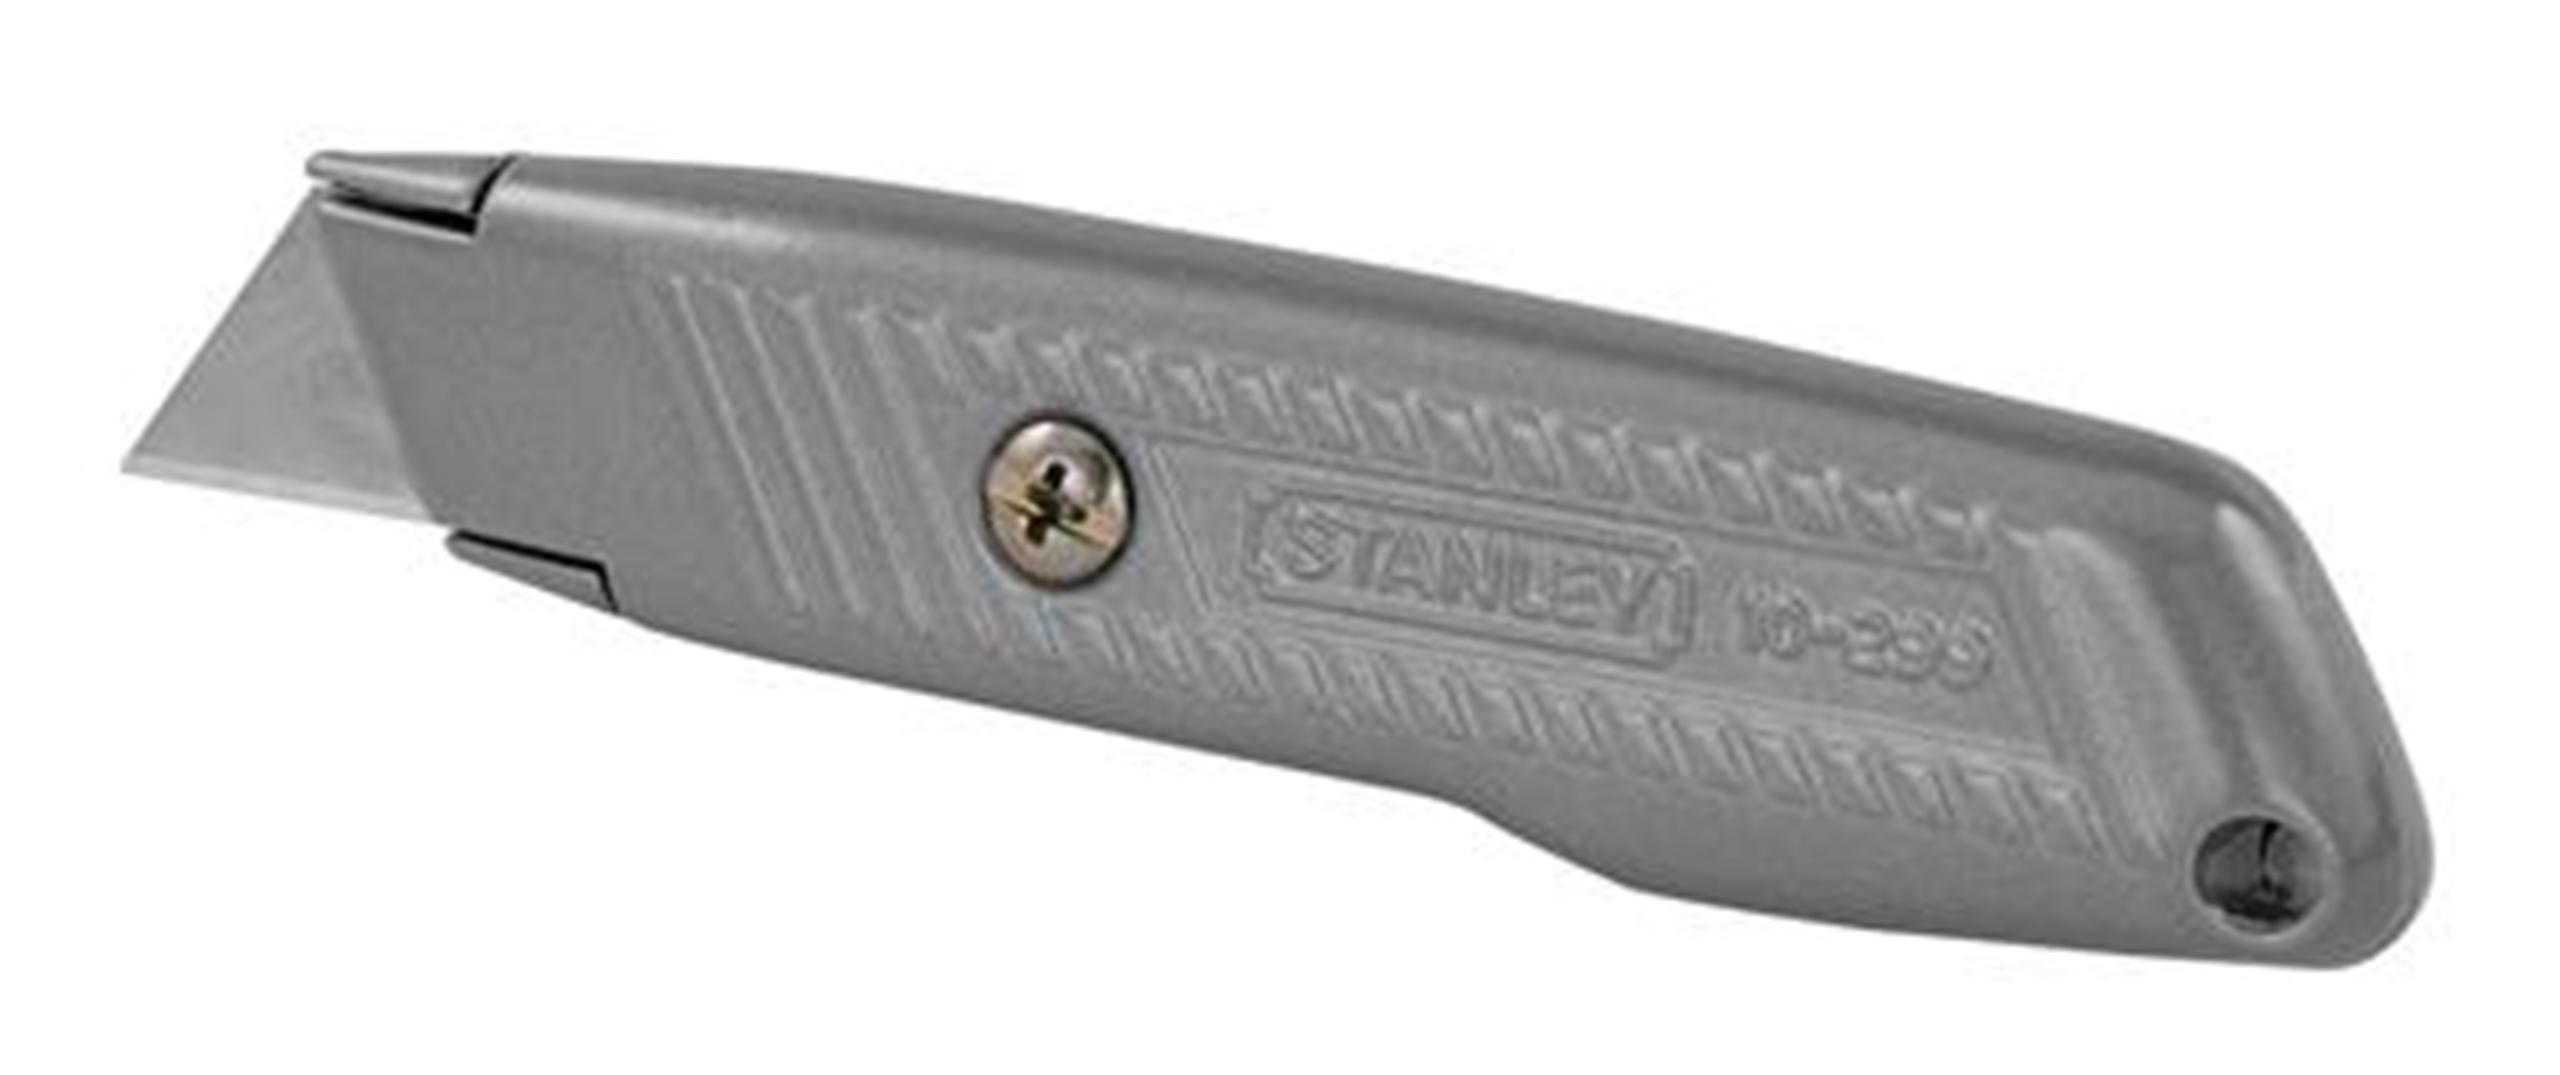 White Cap  Stanley 299 Fixed Blade Interlock 2-7/16 Blade 5.51 x 3 Gray  High Carbon Steel Utility Knife